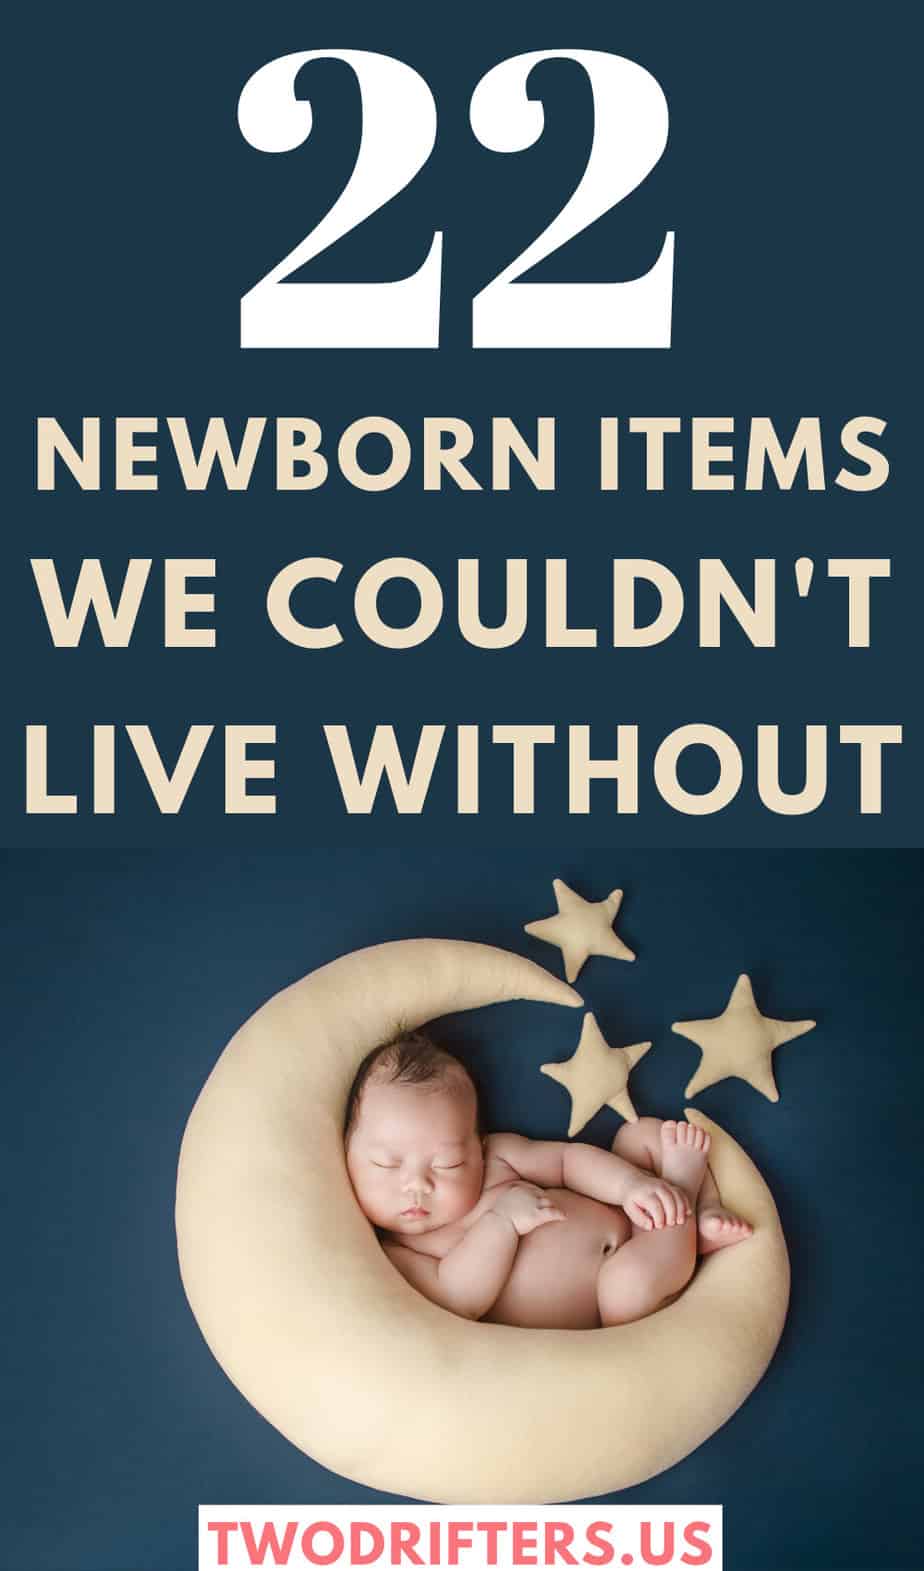 Pinterest social image that says “22 newborn items we couldn’t live without.”